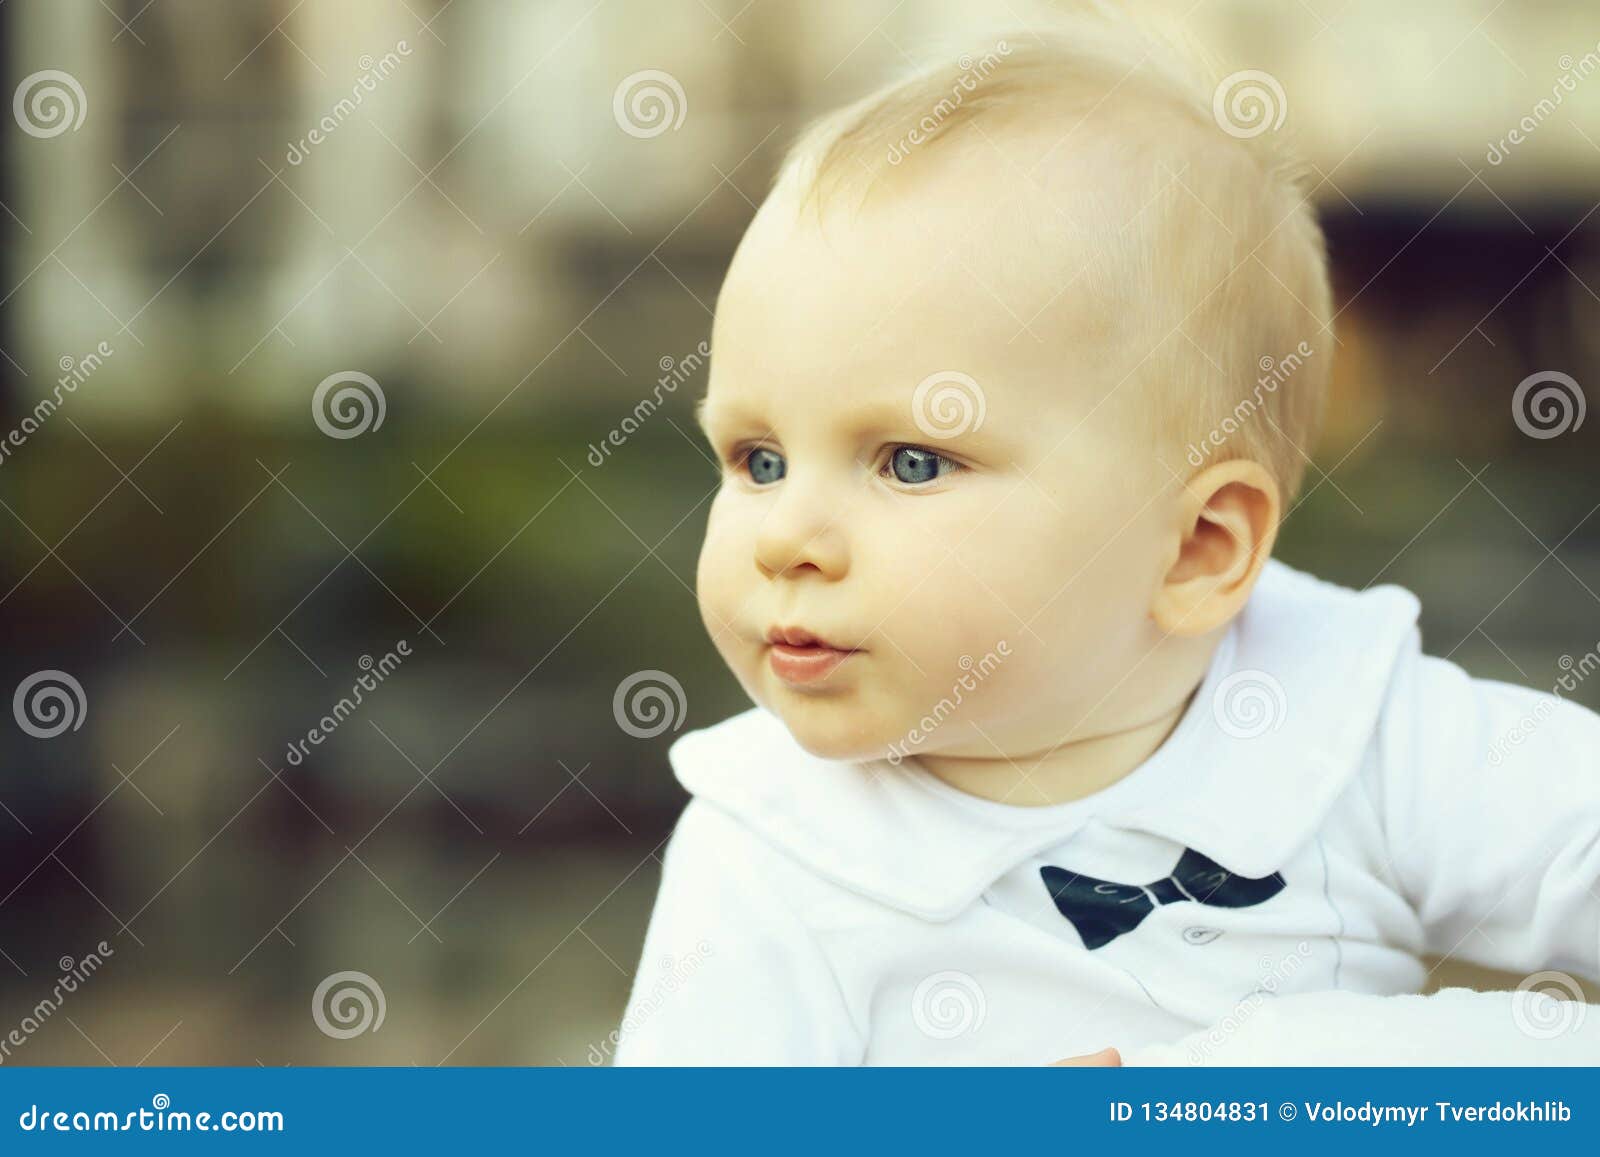 Cute Baby Boy With Blue Eyes And Blond Hair Stock Image Image Of